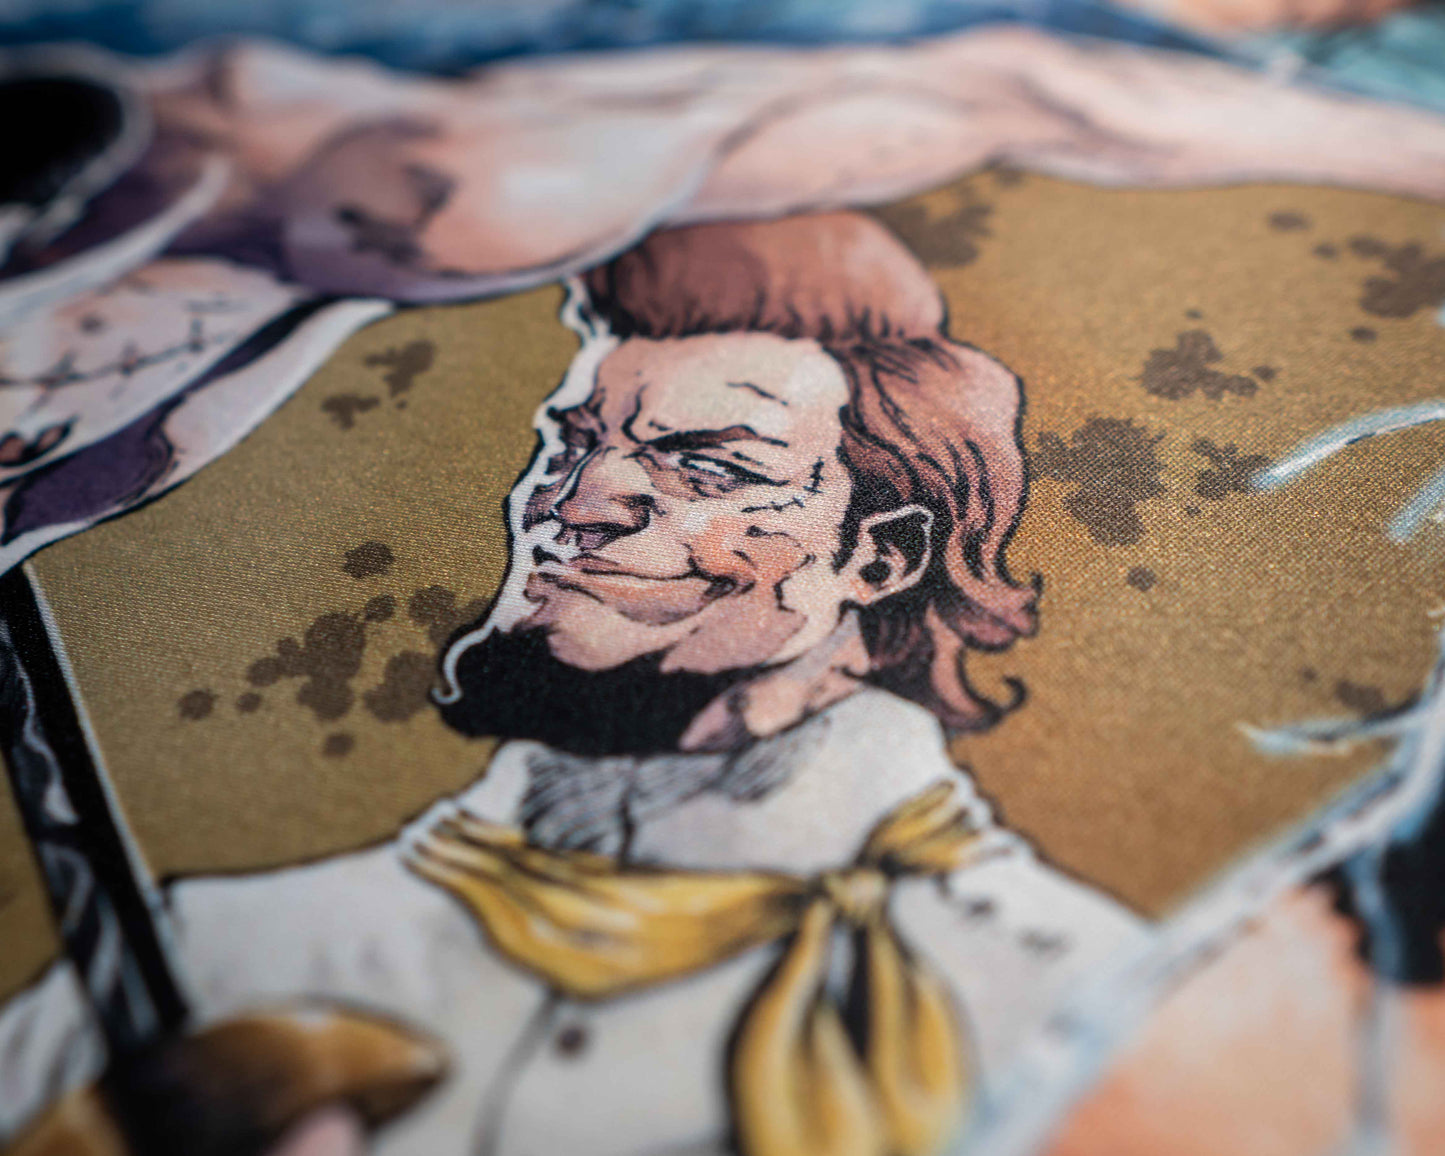 close up image of a character with a smile, looking confident